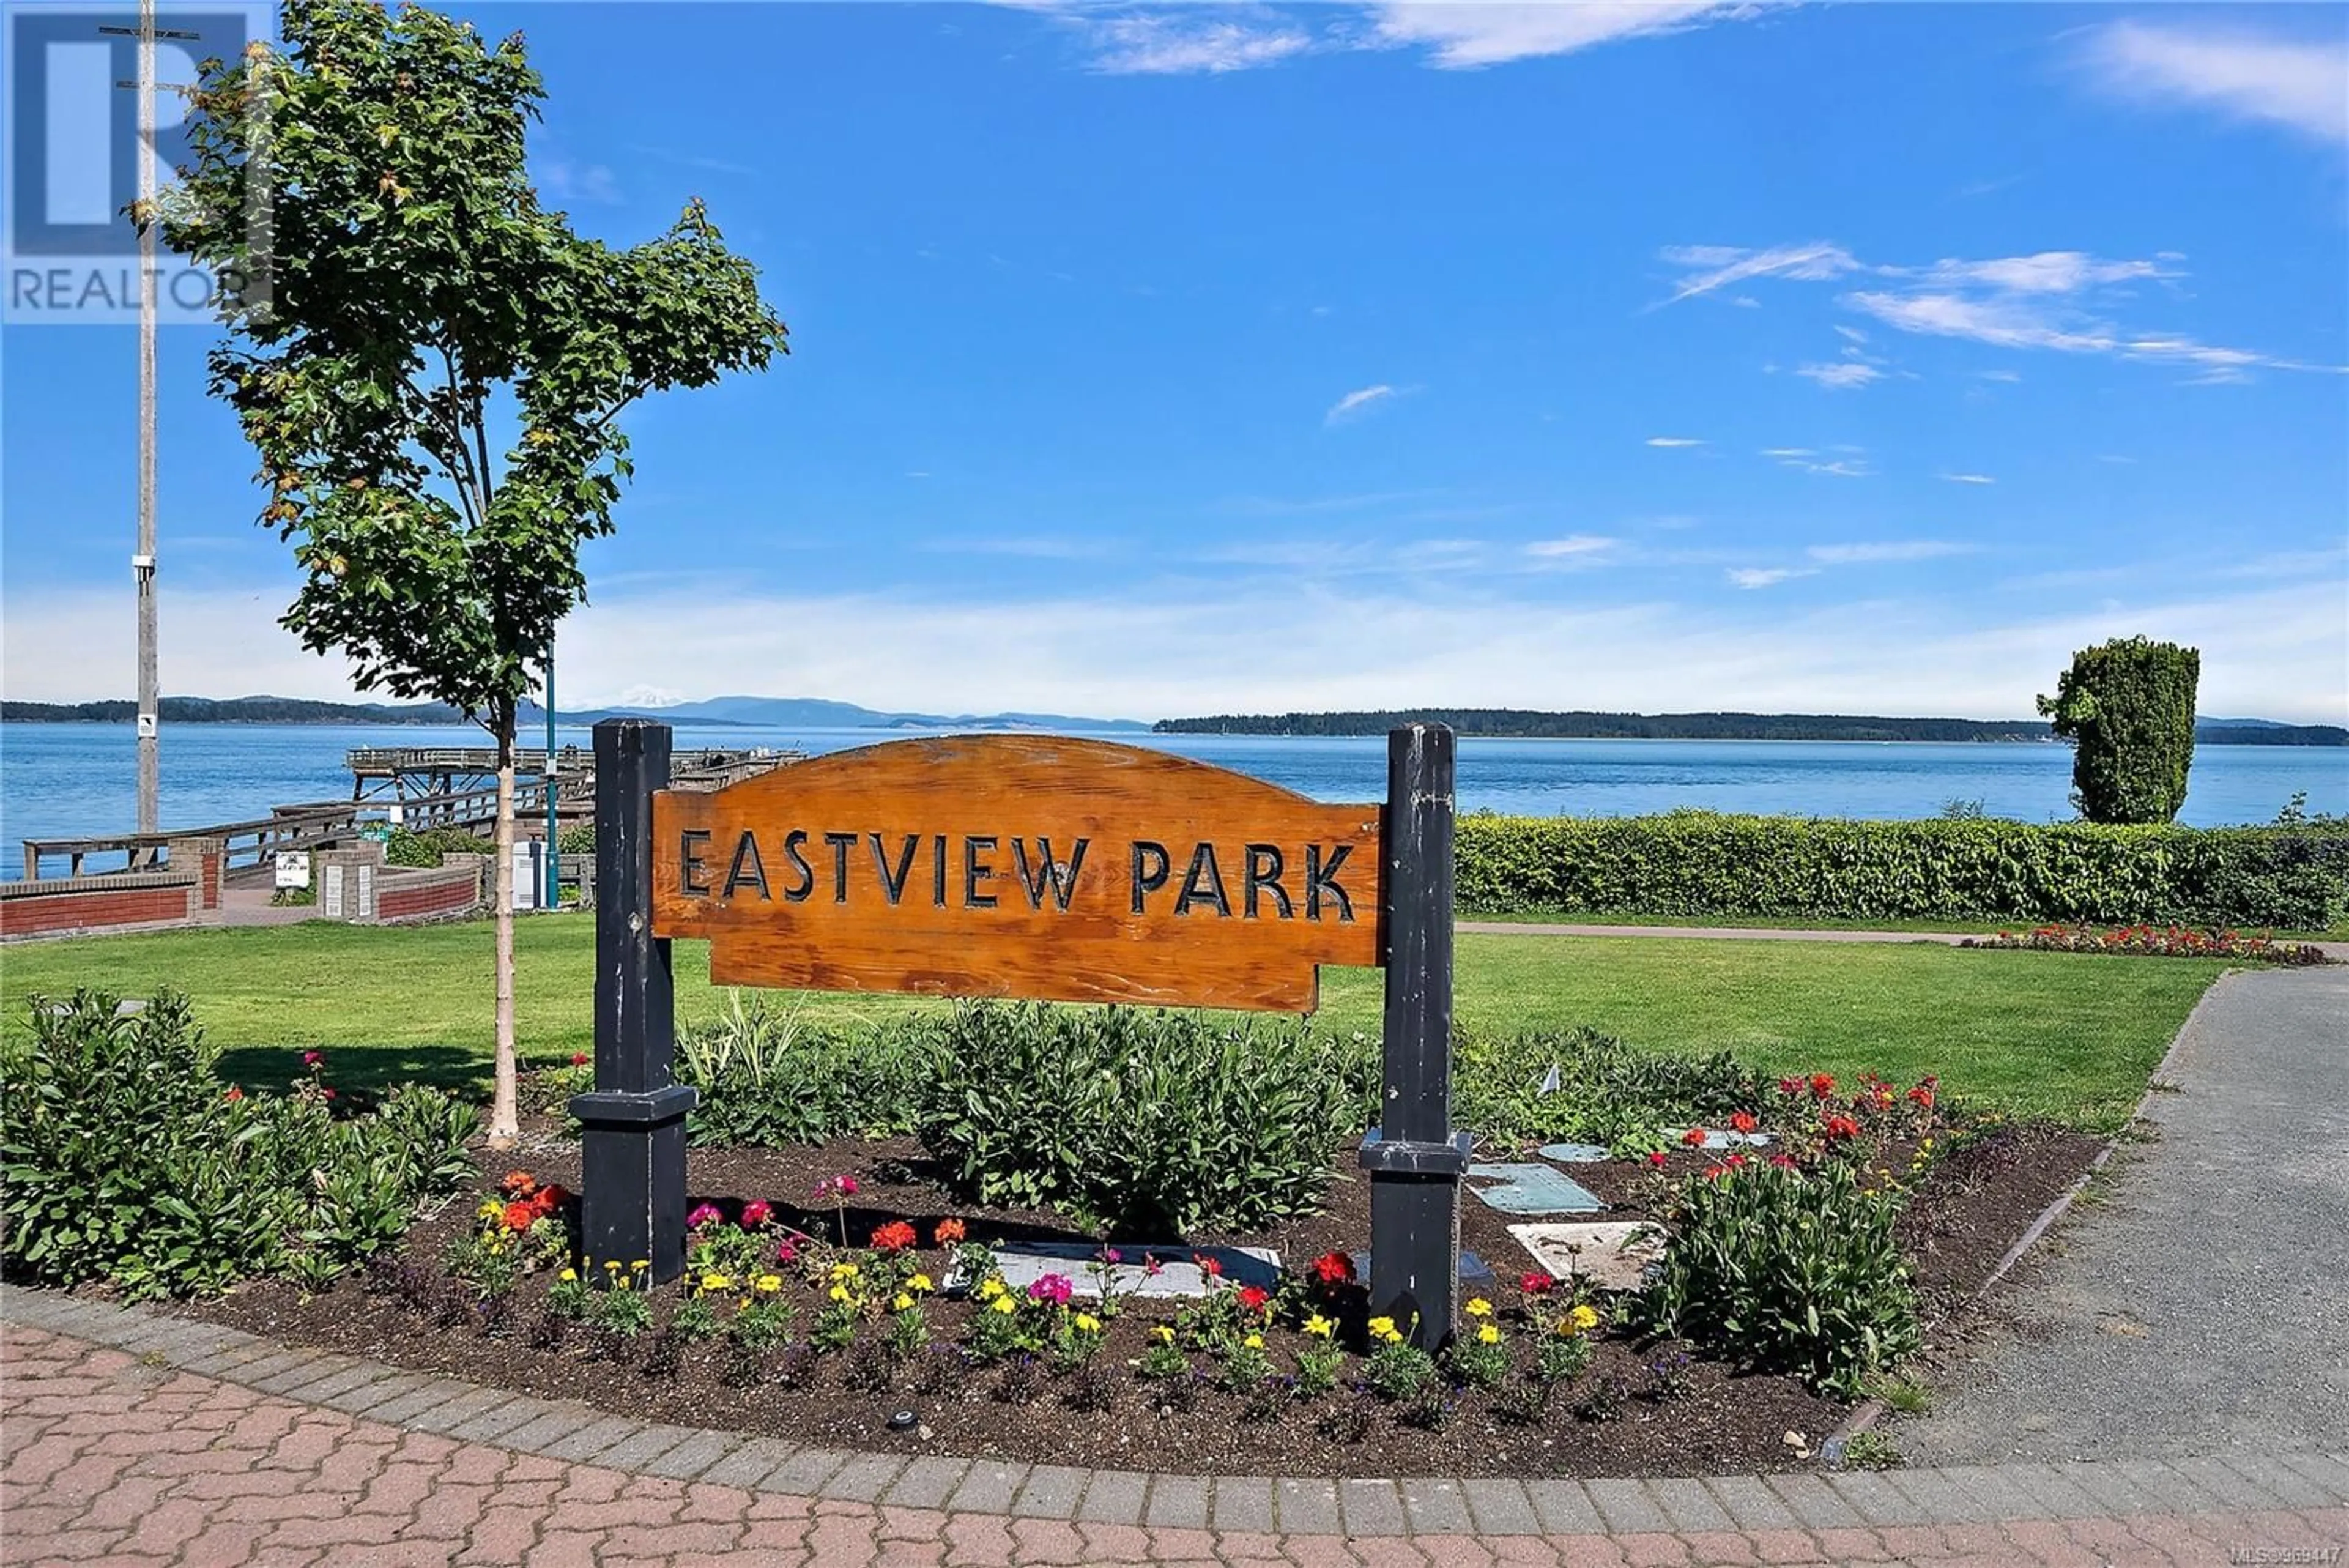 Lakeview for 103 9730 Eastview Dr, Sidney British Columbia V8L3E4